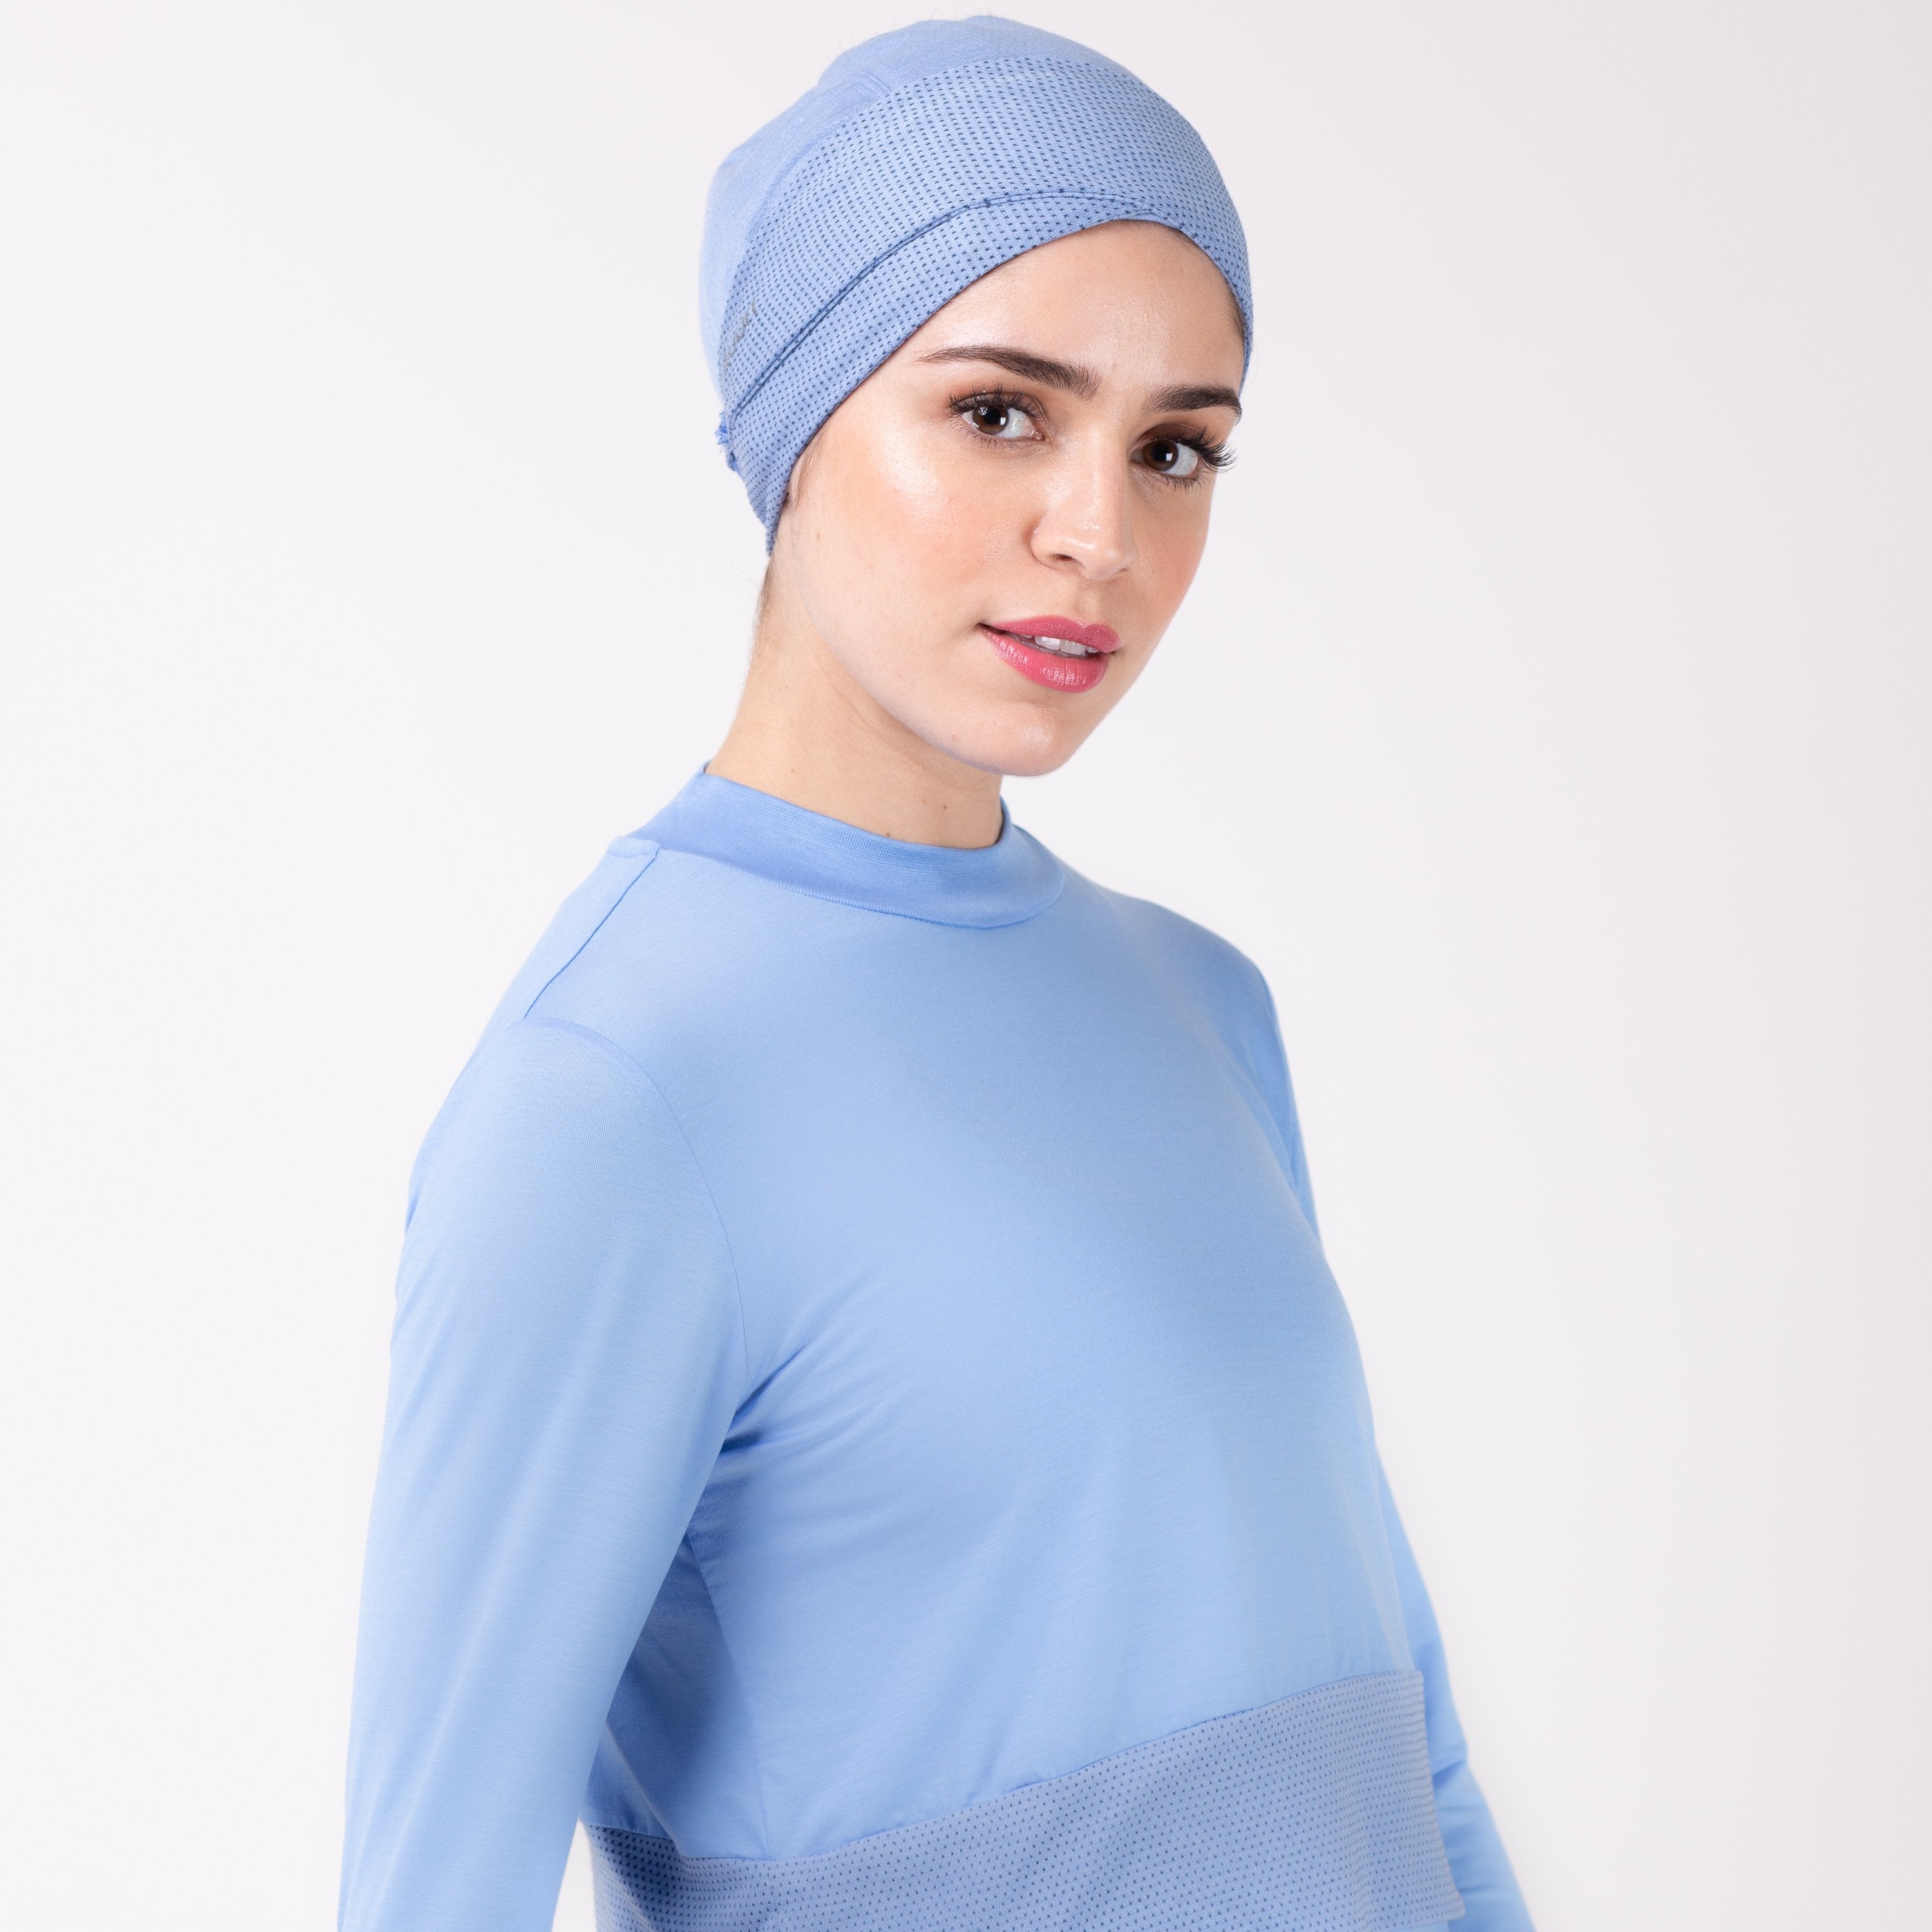 Woman facing right in a sky blue shirt with matching sky blue HAWA headwrap.